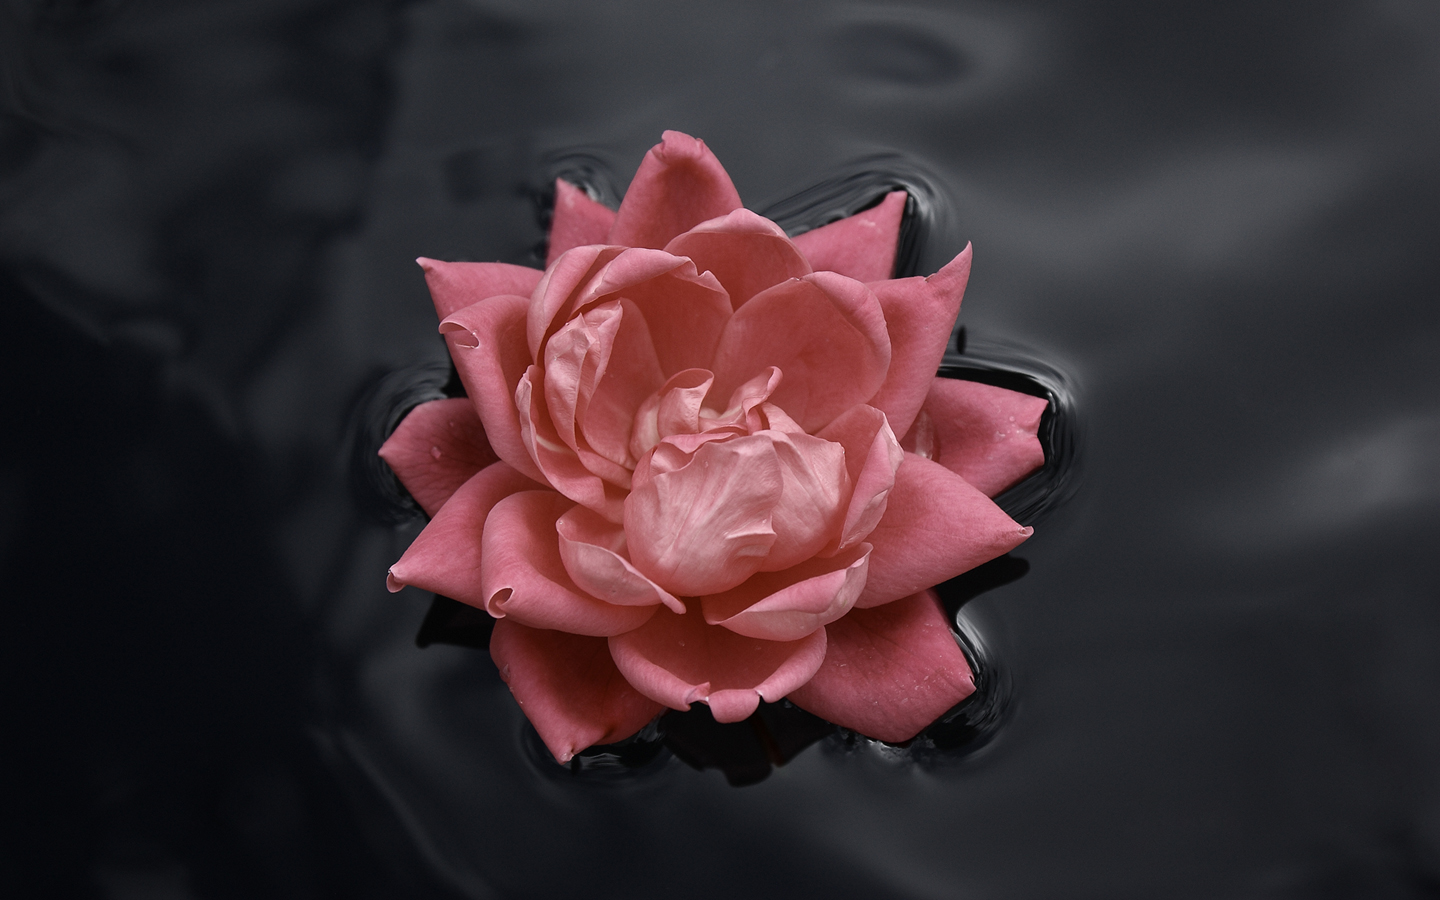 HD Wallpapers Pics: Rose Painting HD Wallpapers